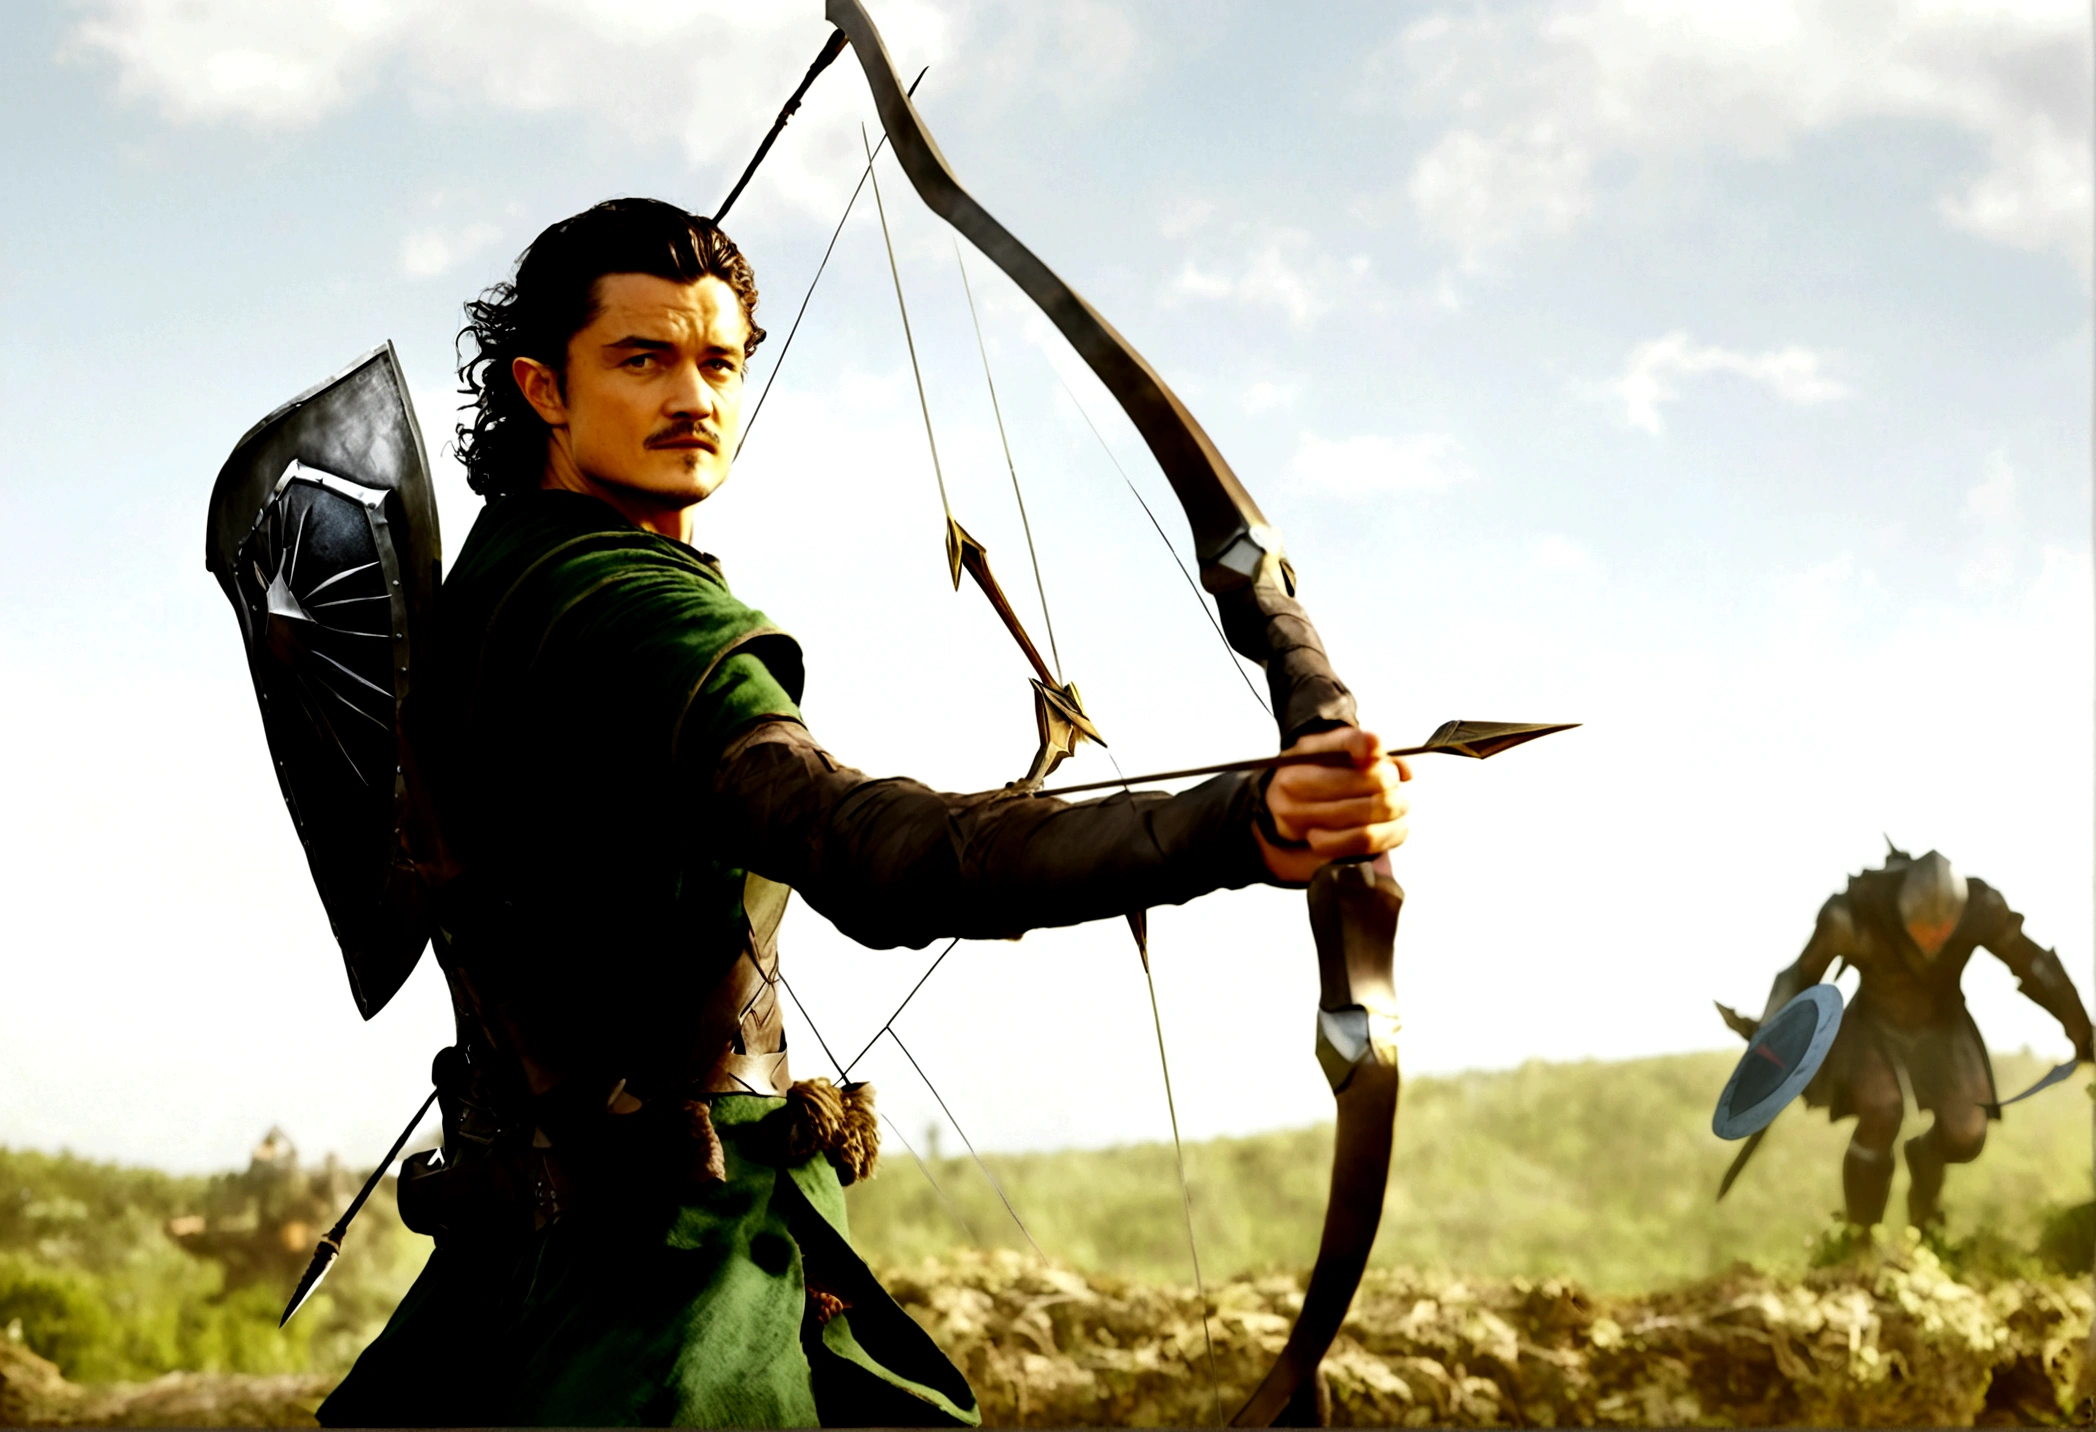 Orlando Bloom (2008, Link Costume, bow and arrow, shield on back) heroic pose, monster in distance
